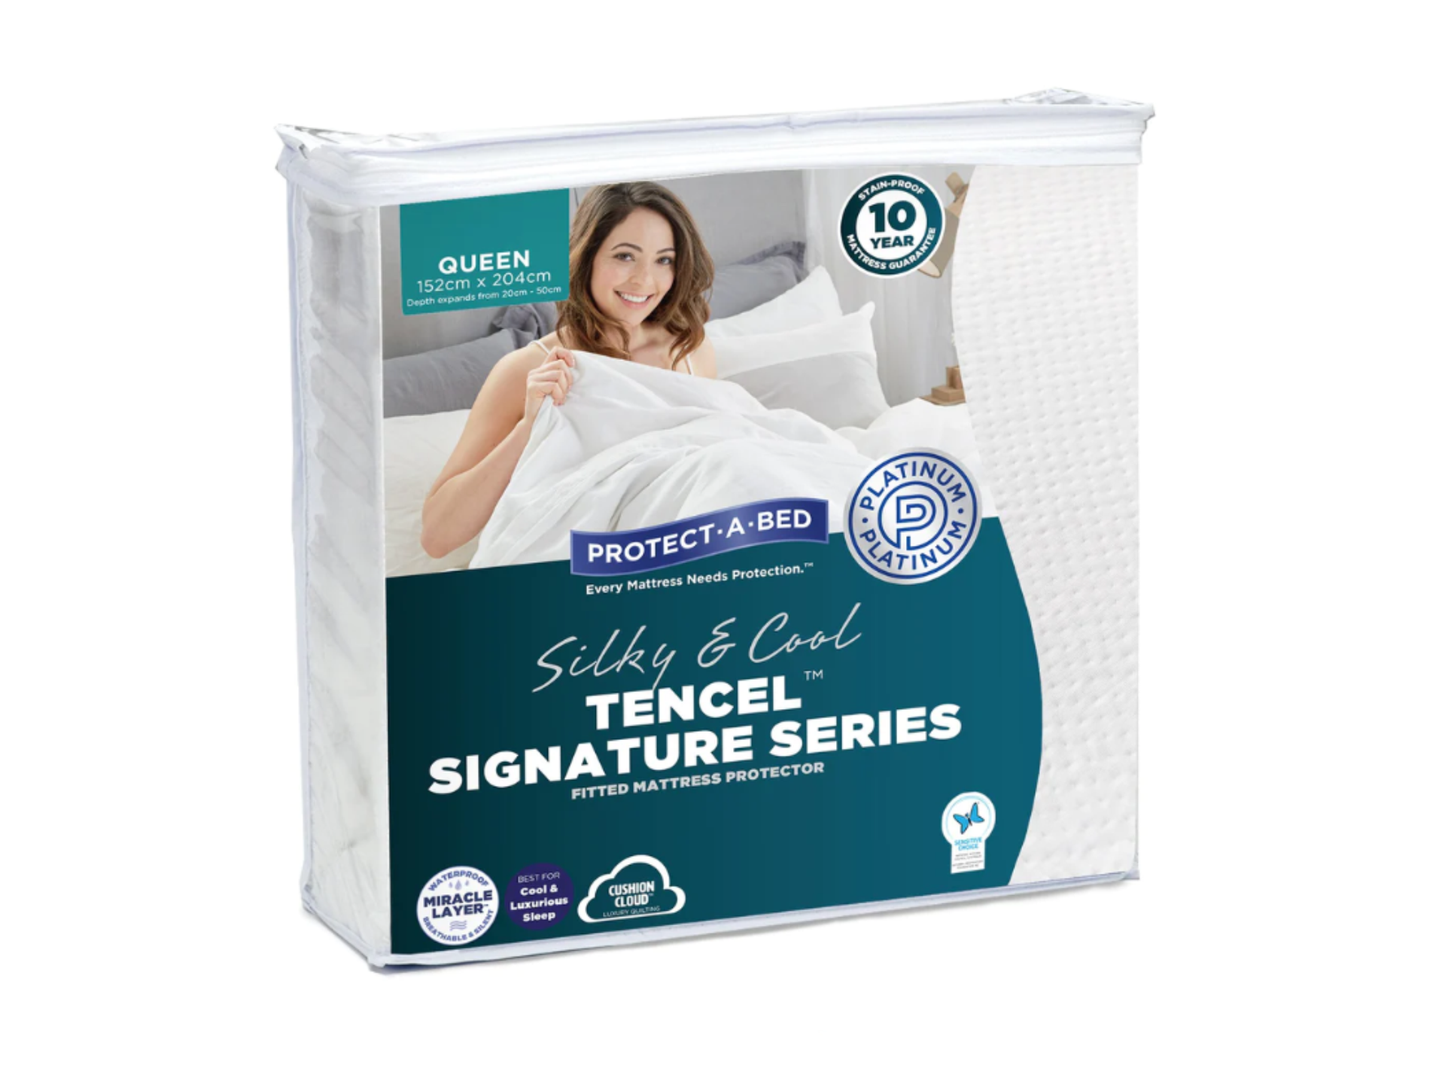 Protect-A-Bed Bundle featuring Tencel® Signature Series Queen